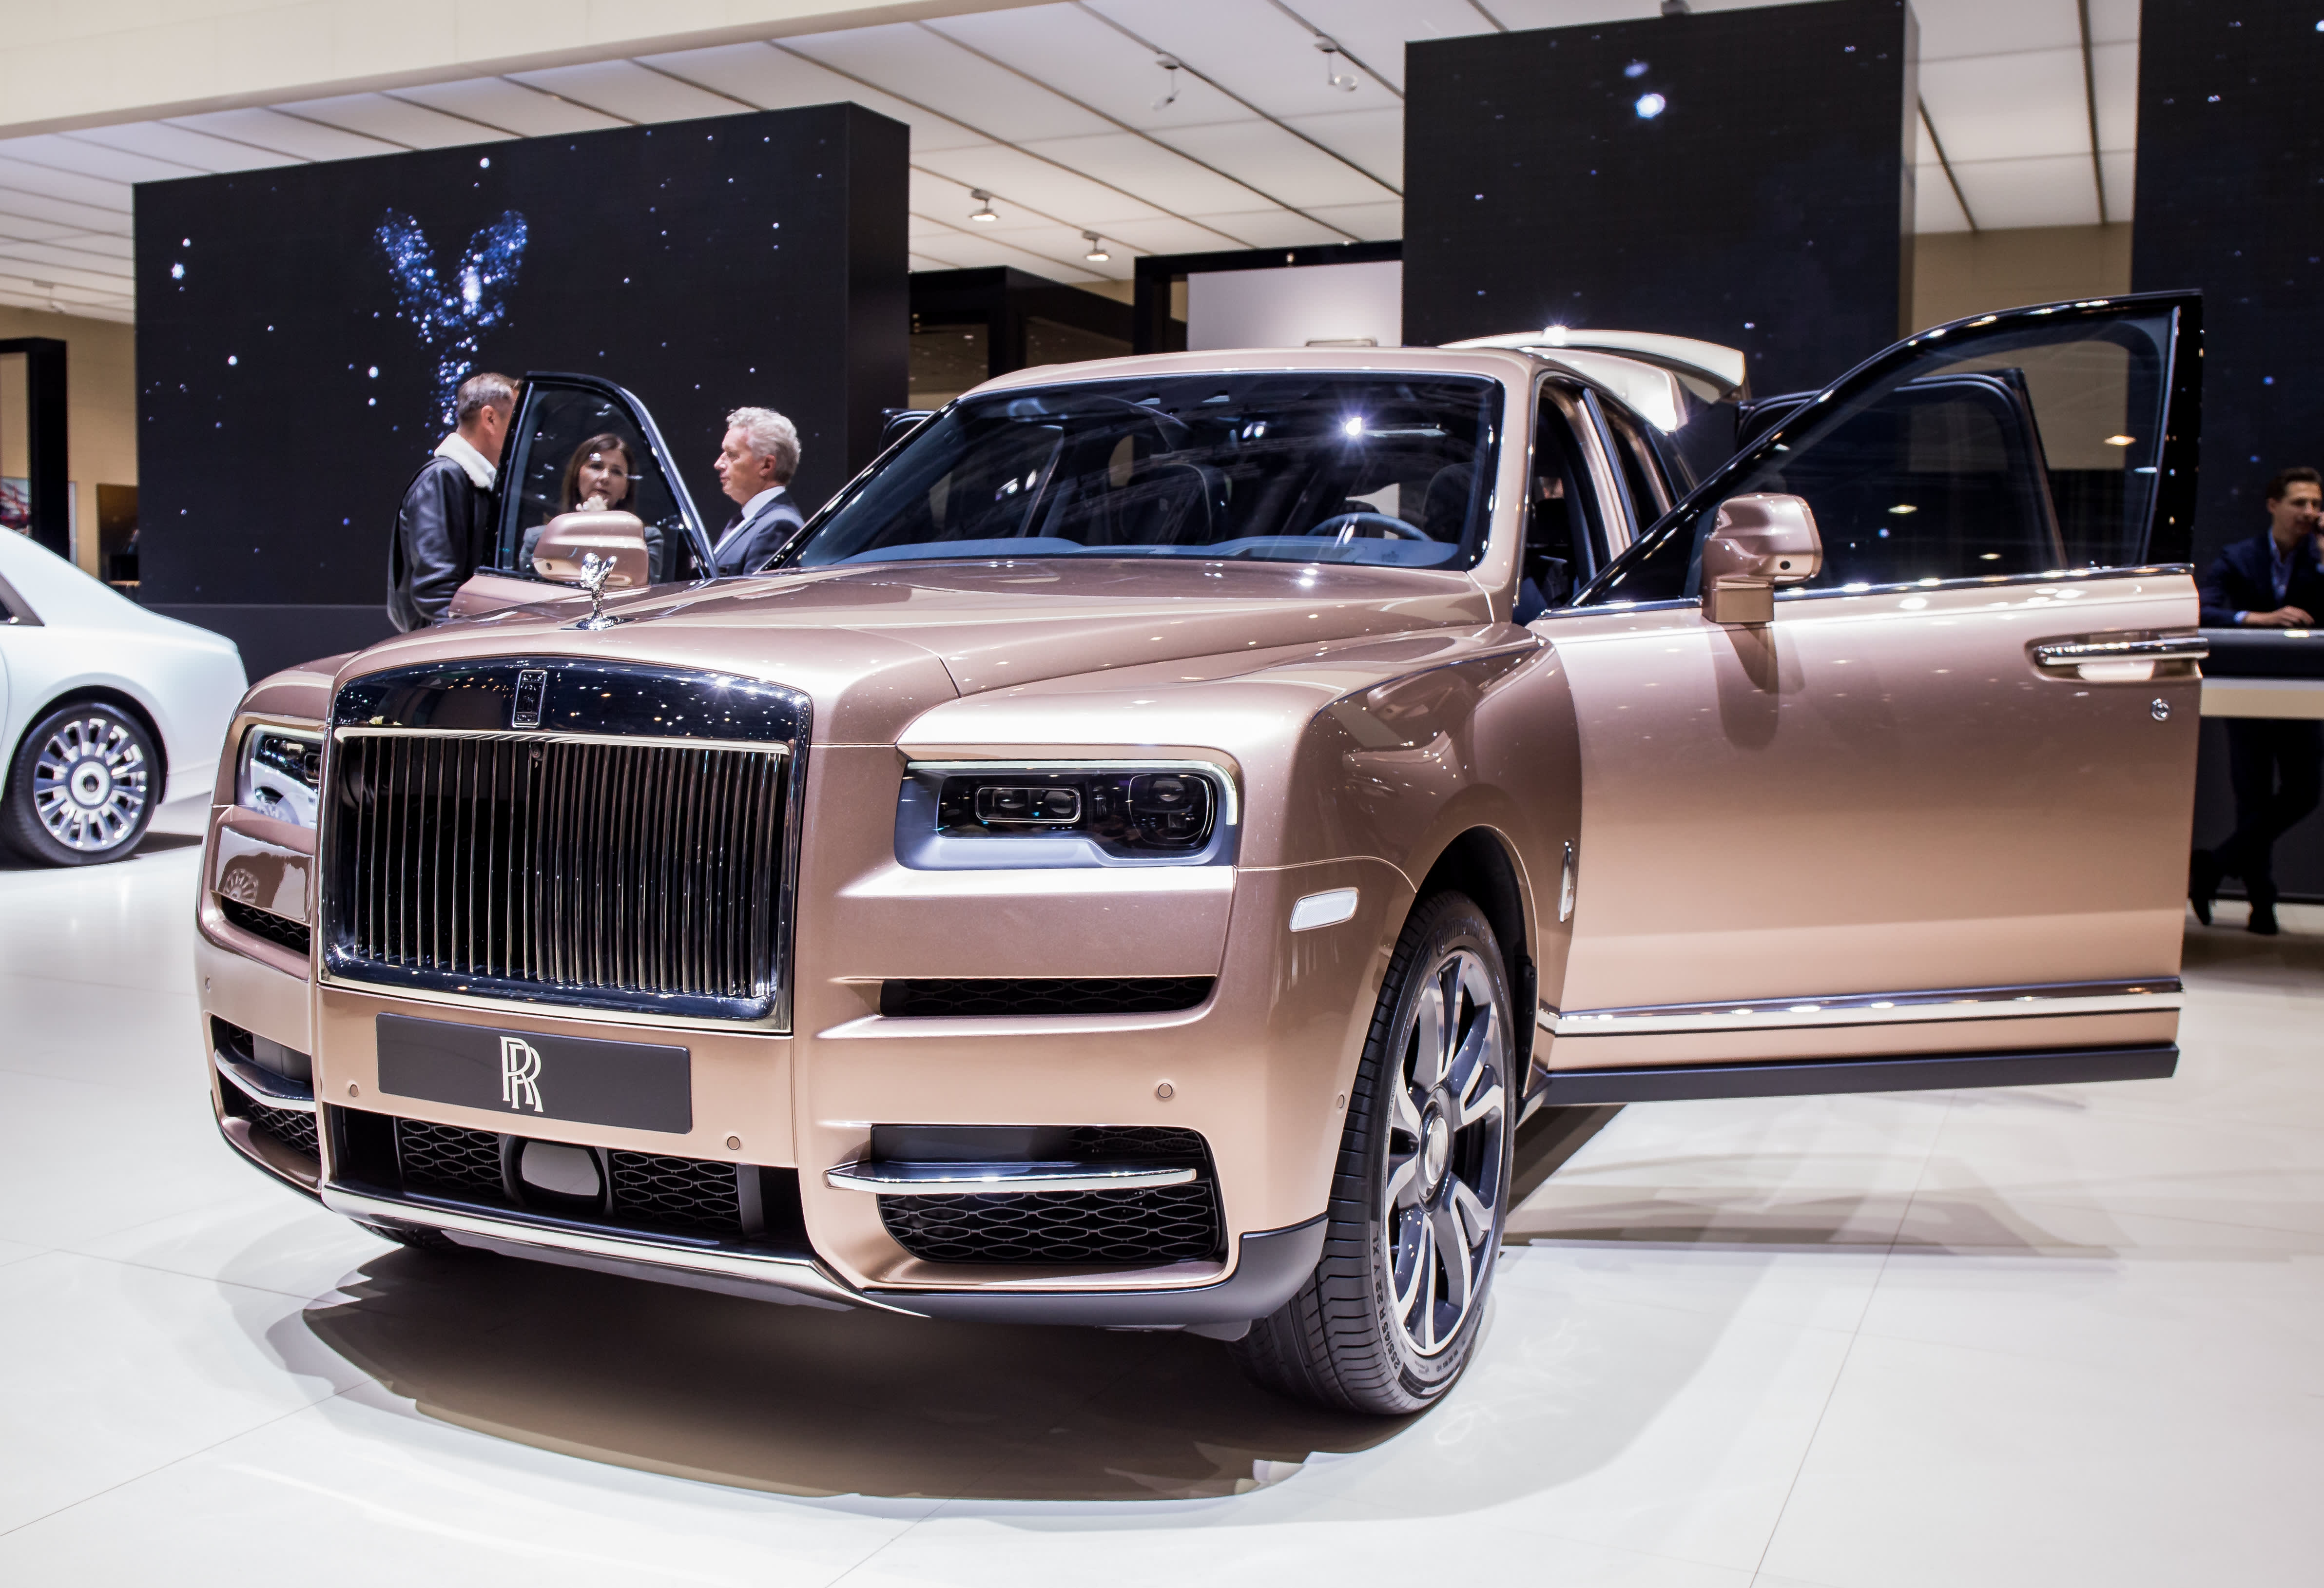 Rolls Royce S 400 000 Suv Helps Carmaker Set Sales Record In 2019